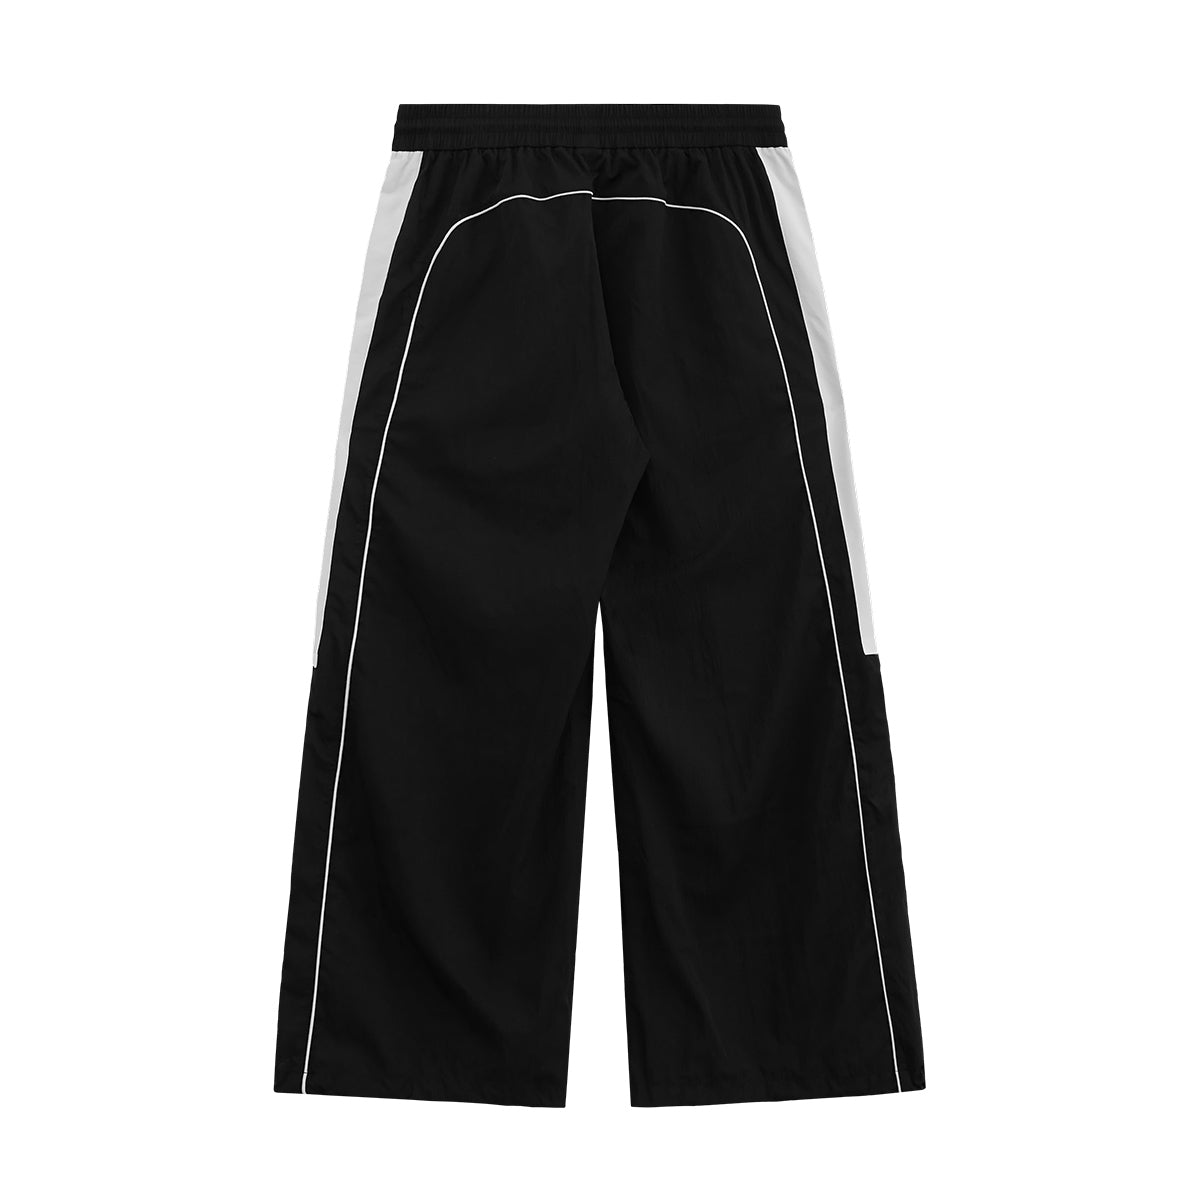 Black retro track pants with wide legs